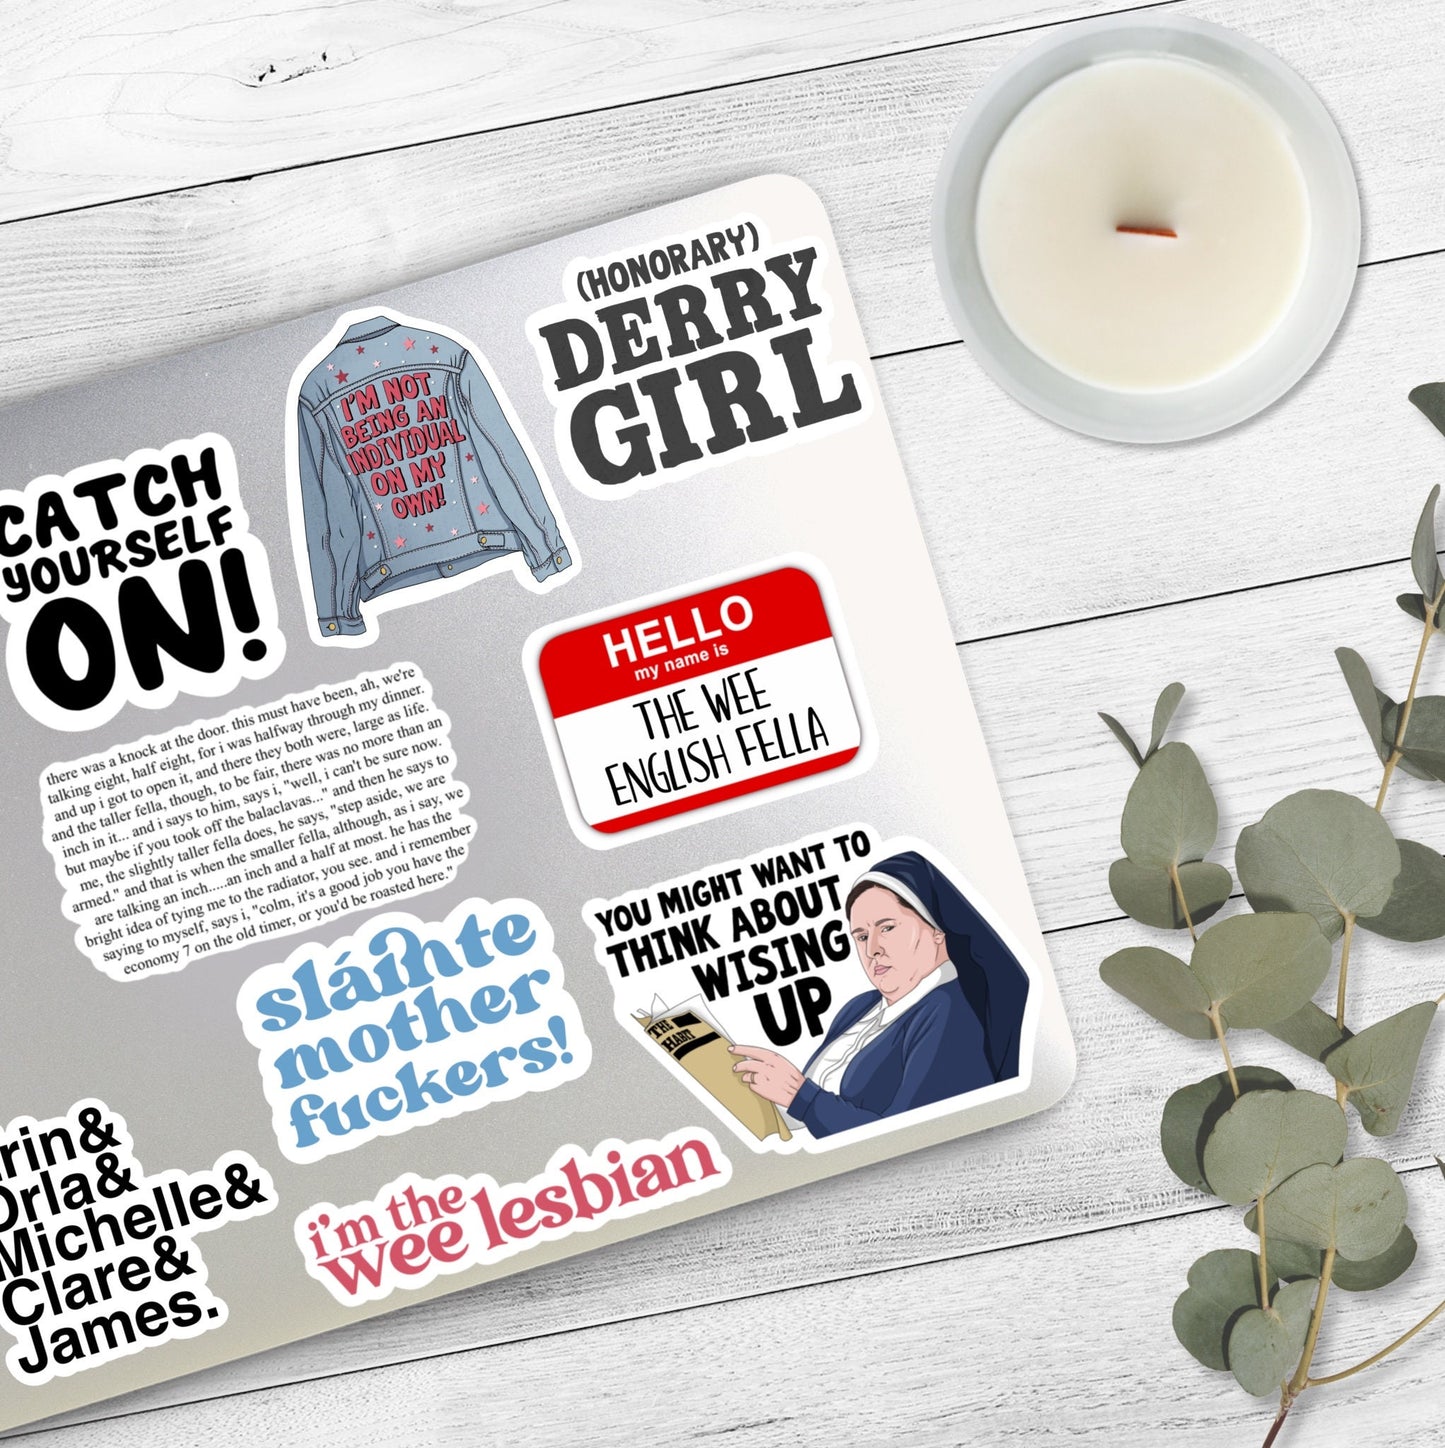 The Derry Girls (& The Wee English Fella) | Derry Girls Stickers